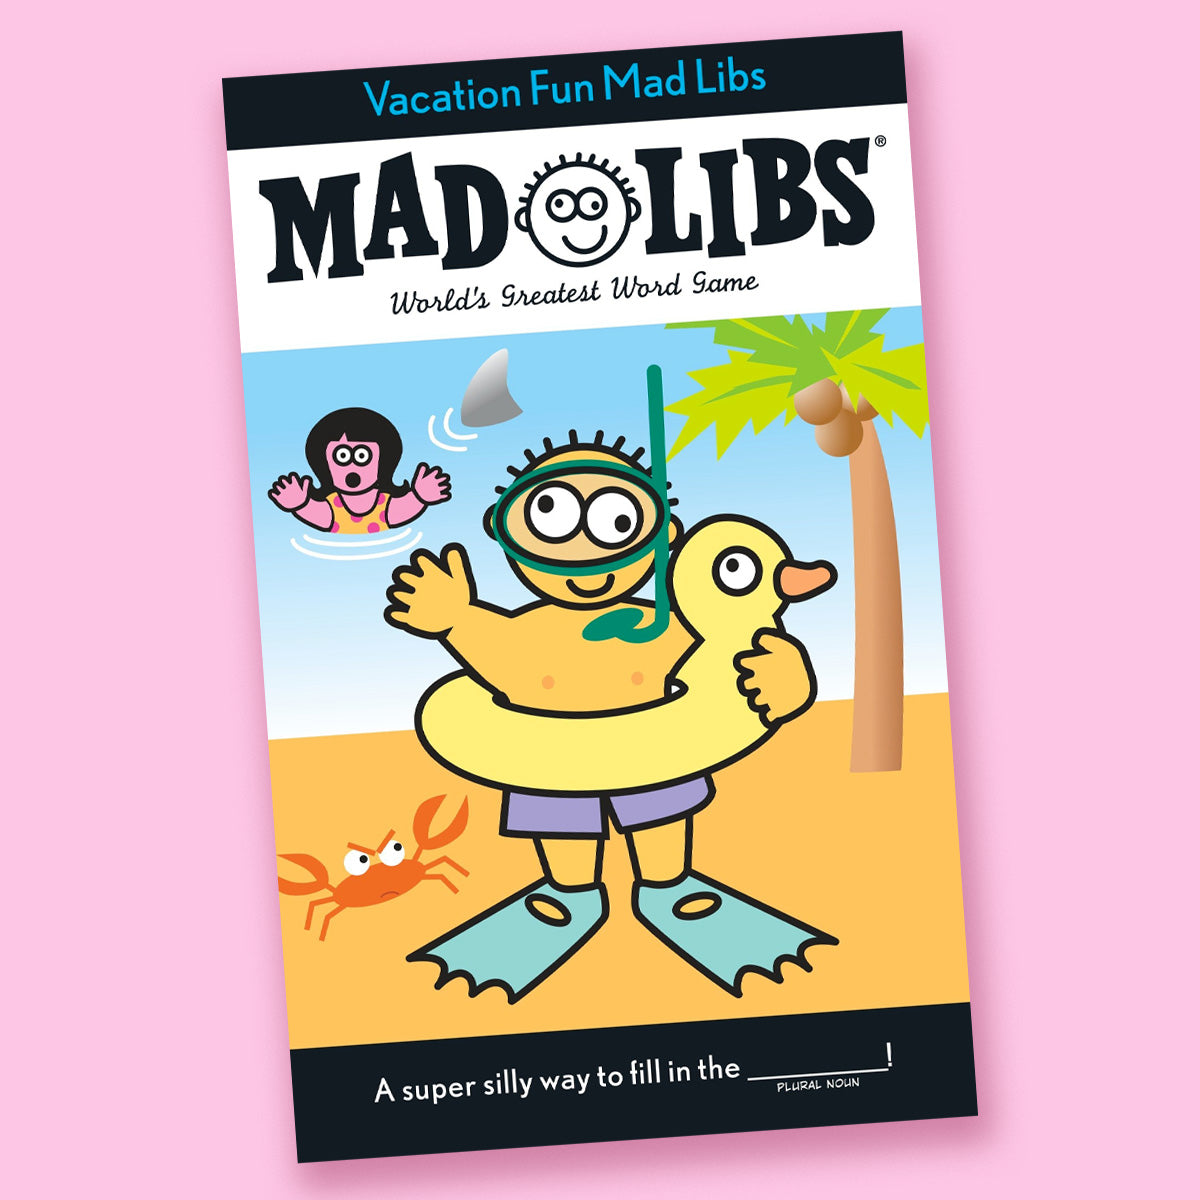 Vacation Fun Mad Libs: World's Greatest Word Game by Roger Price